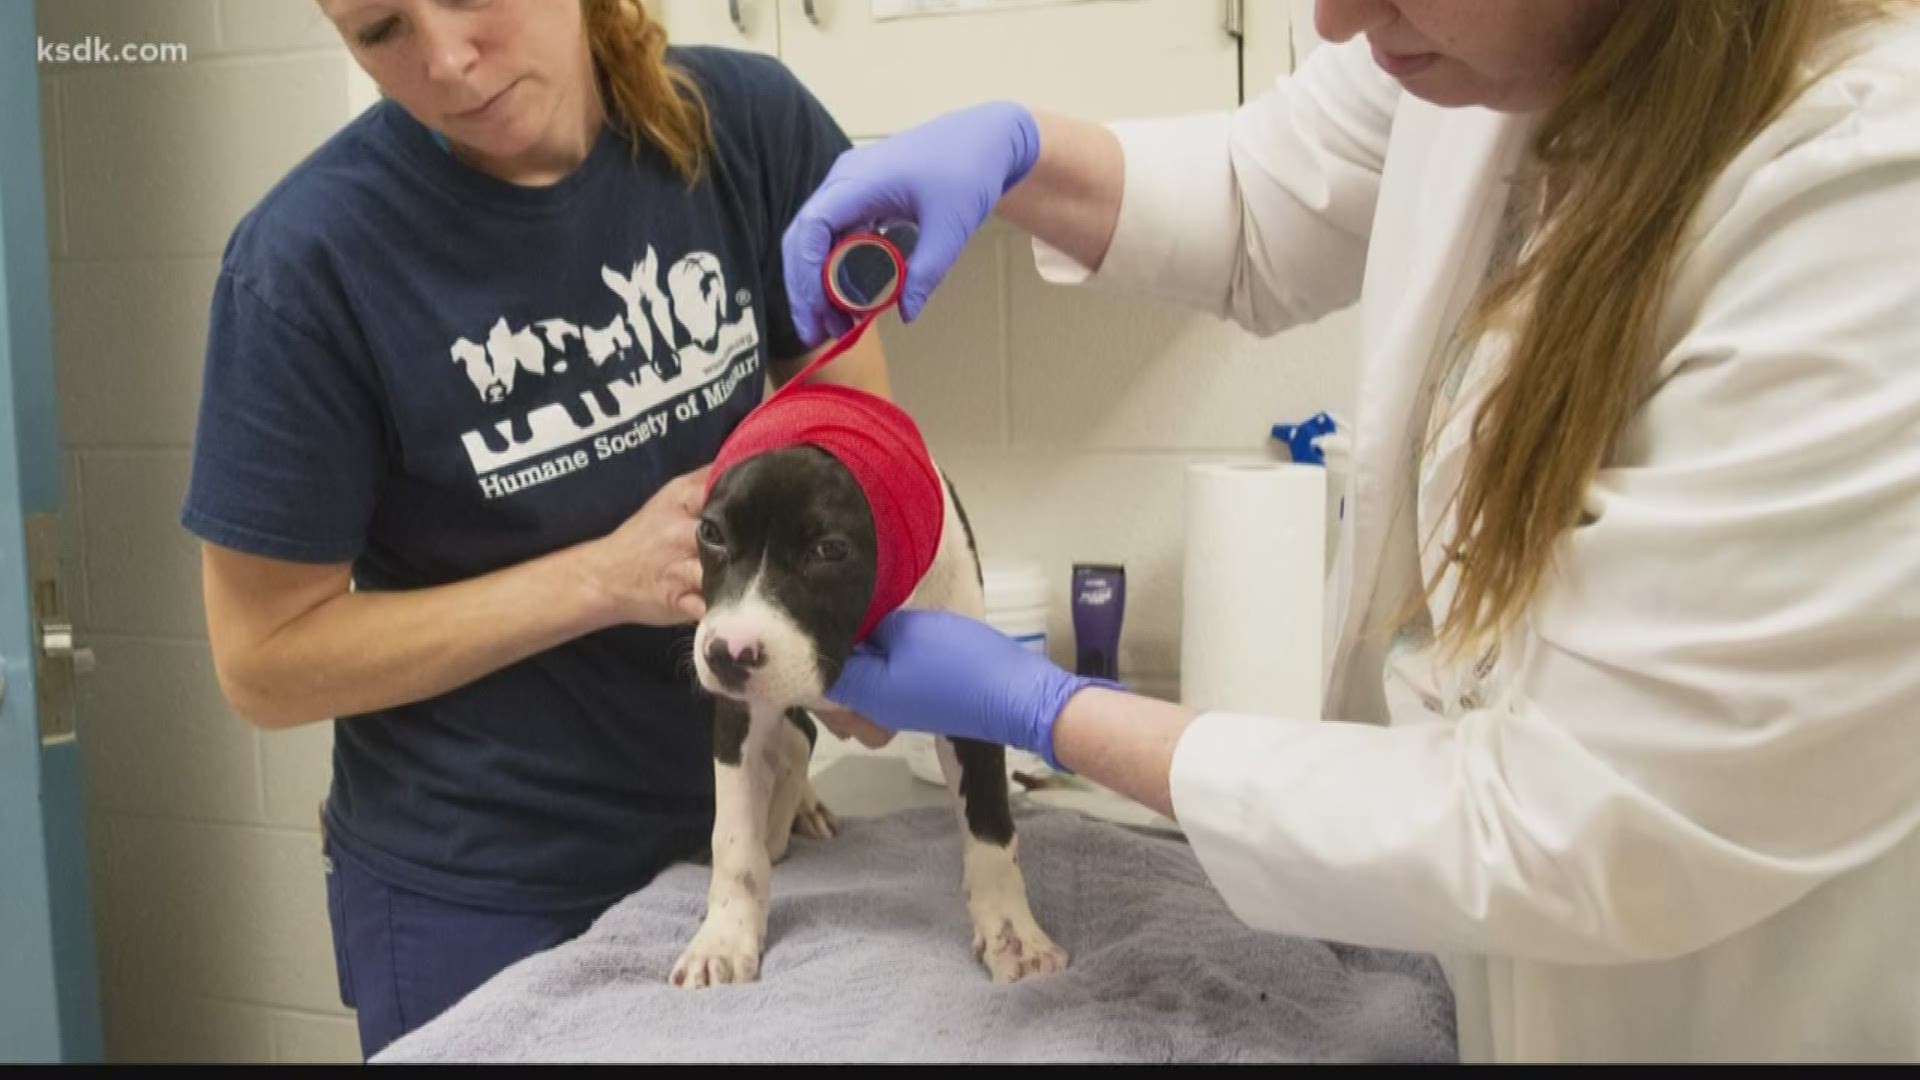 The Missouri Humane Society said someone chopped off her ear flaps and threw her from a car window Monday.